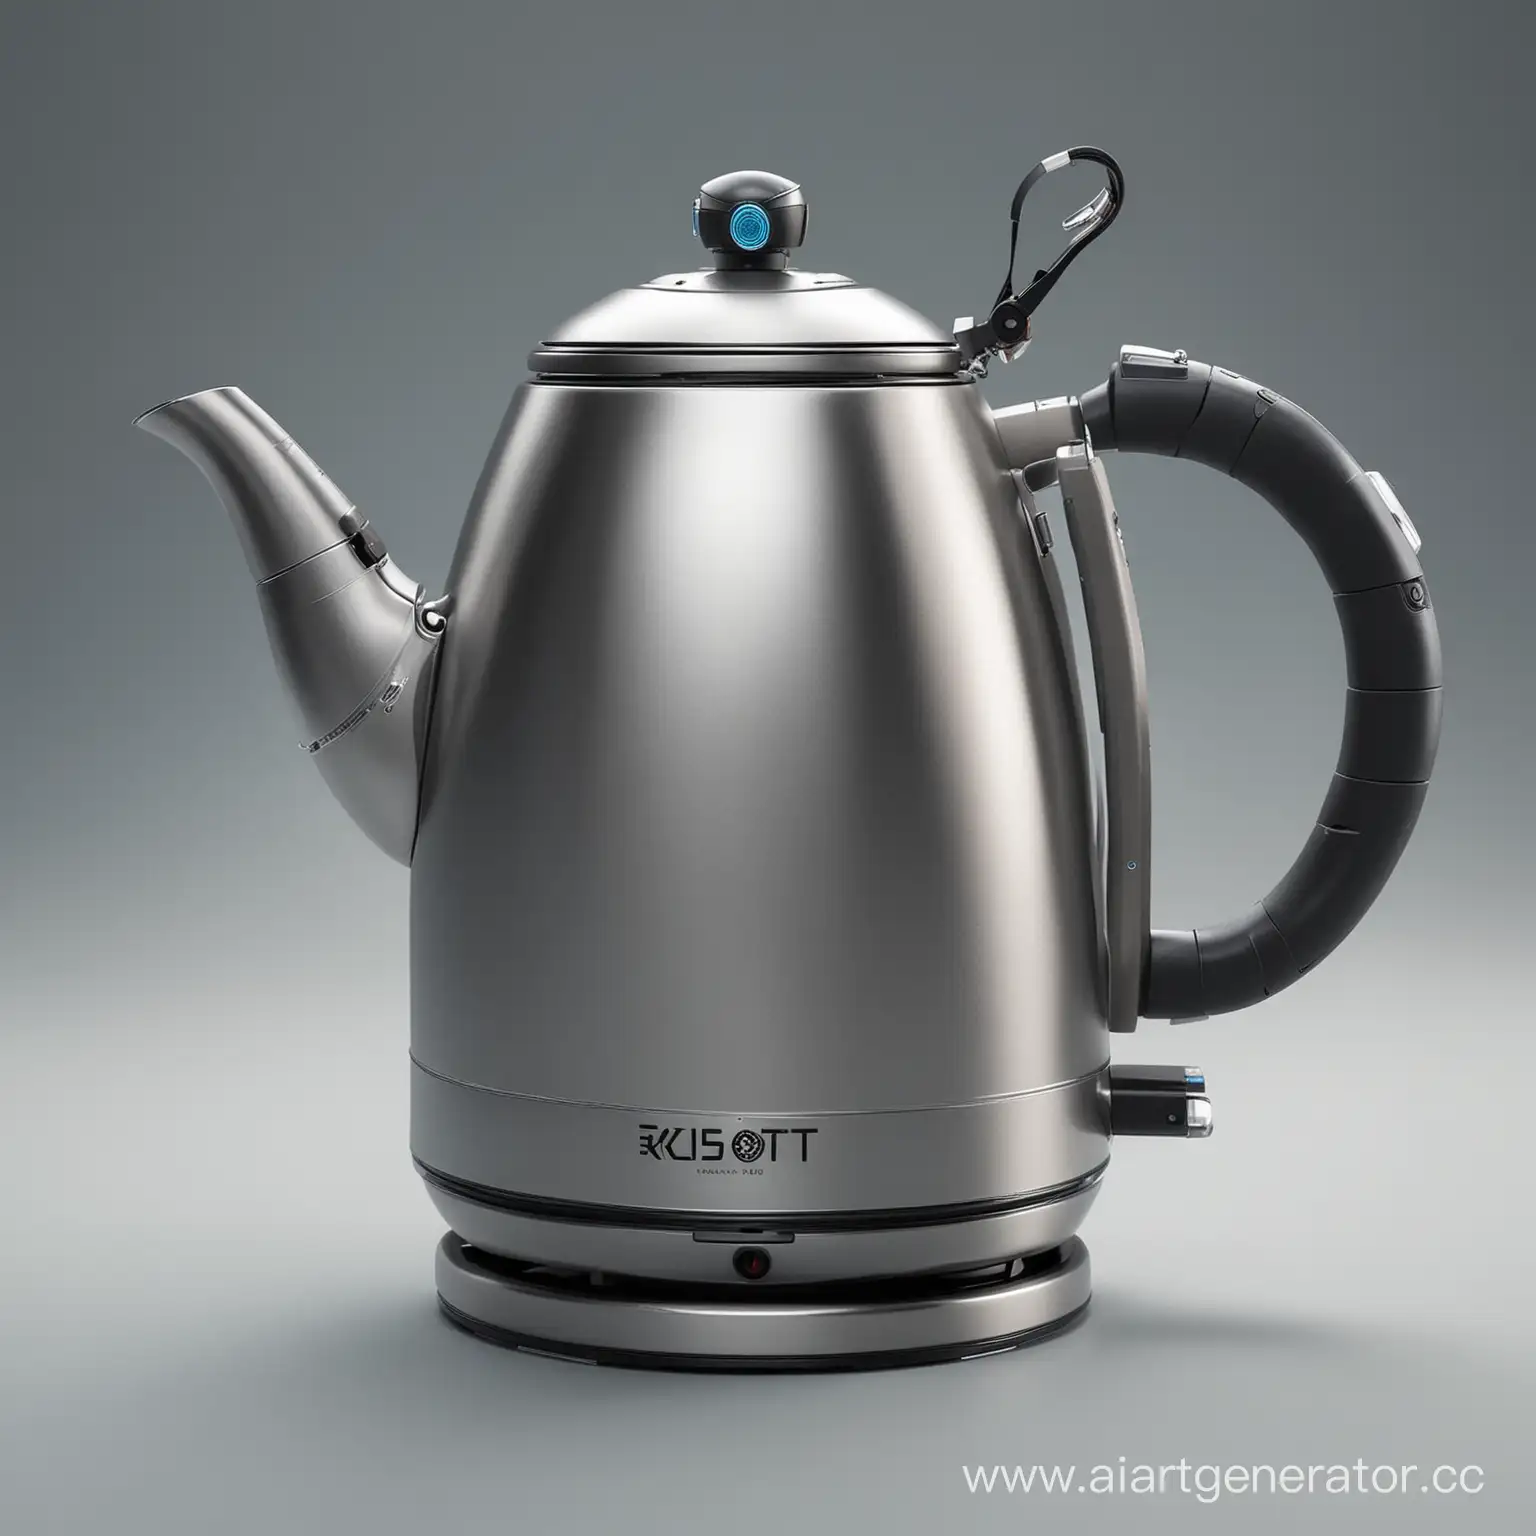 Futuristic-Robot-Kettle-with-Advanced-Technology